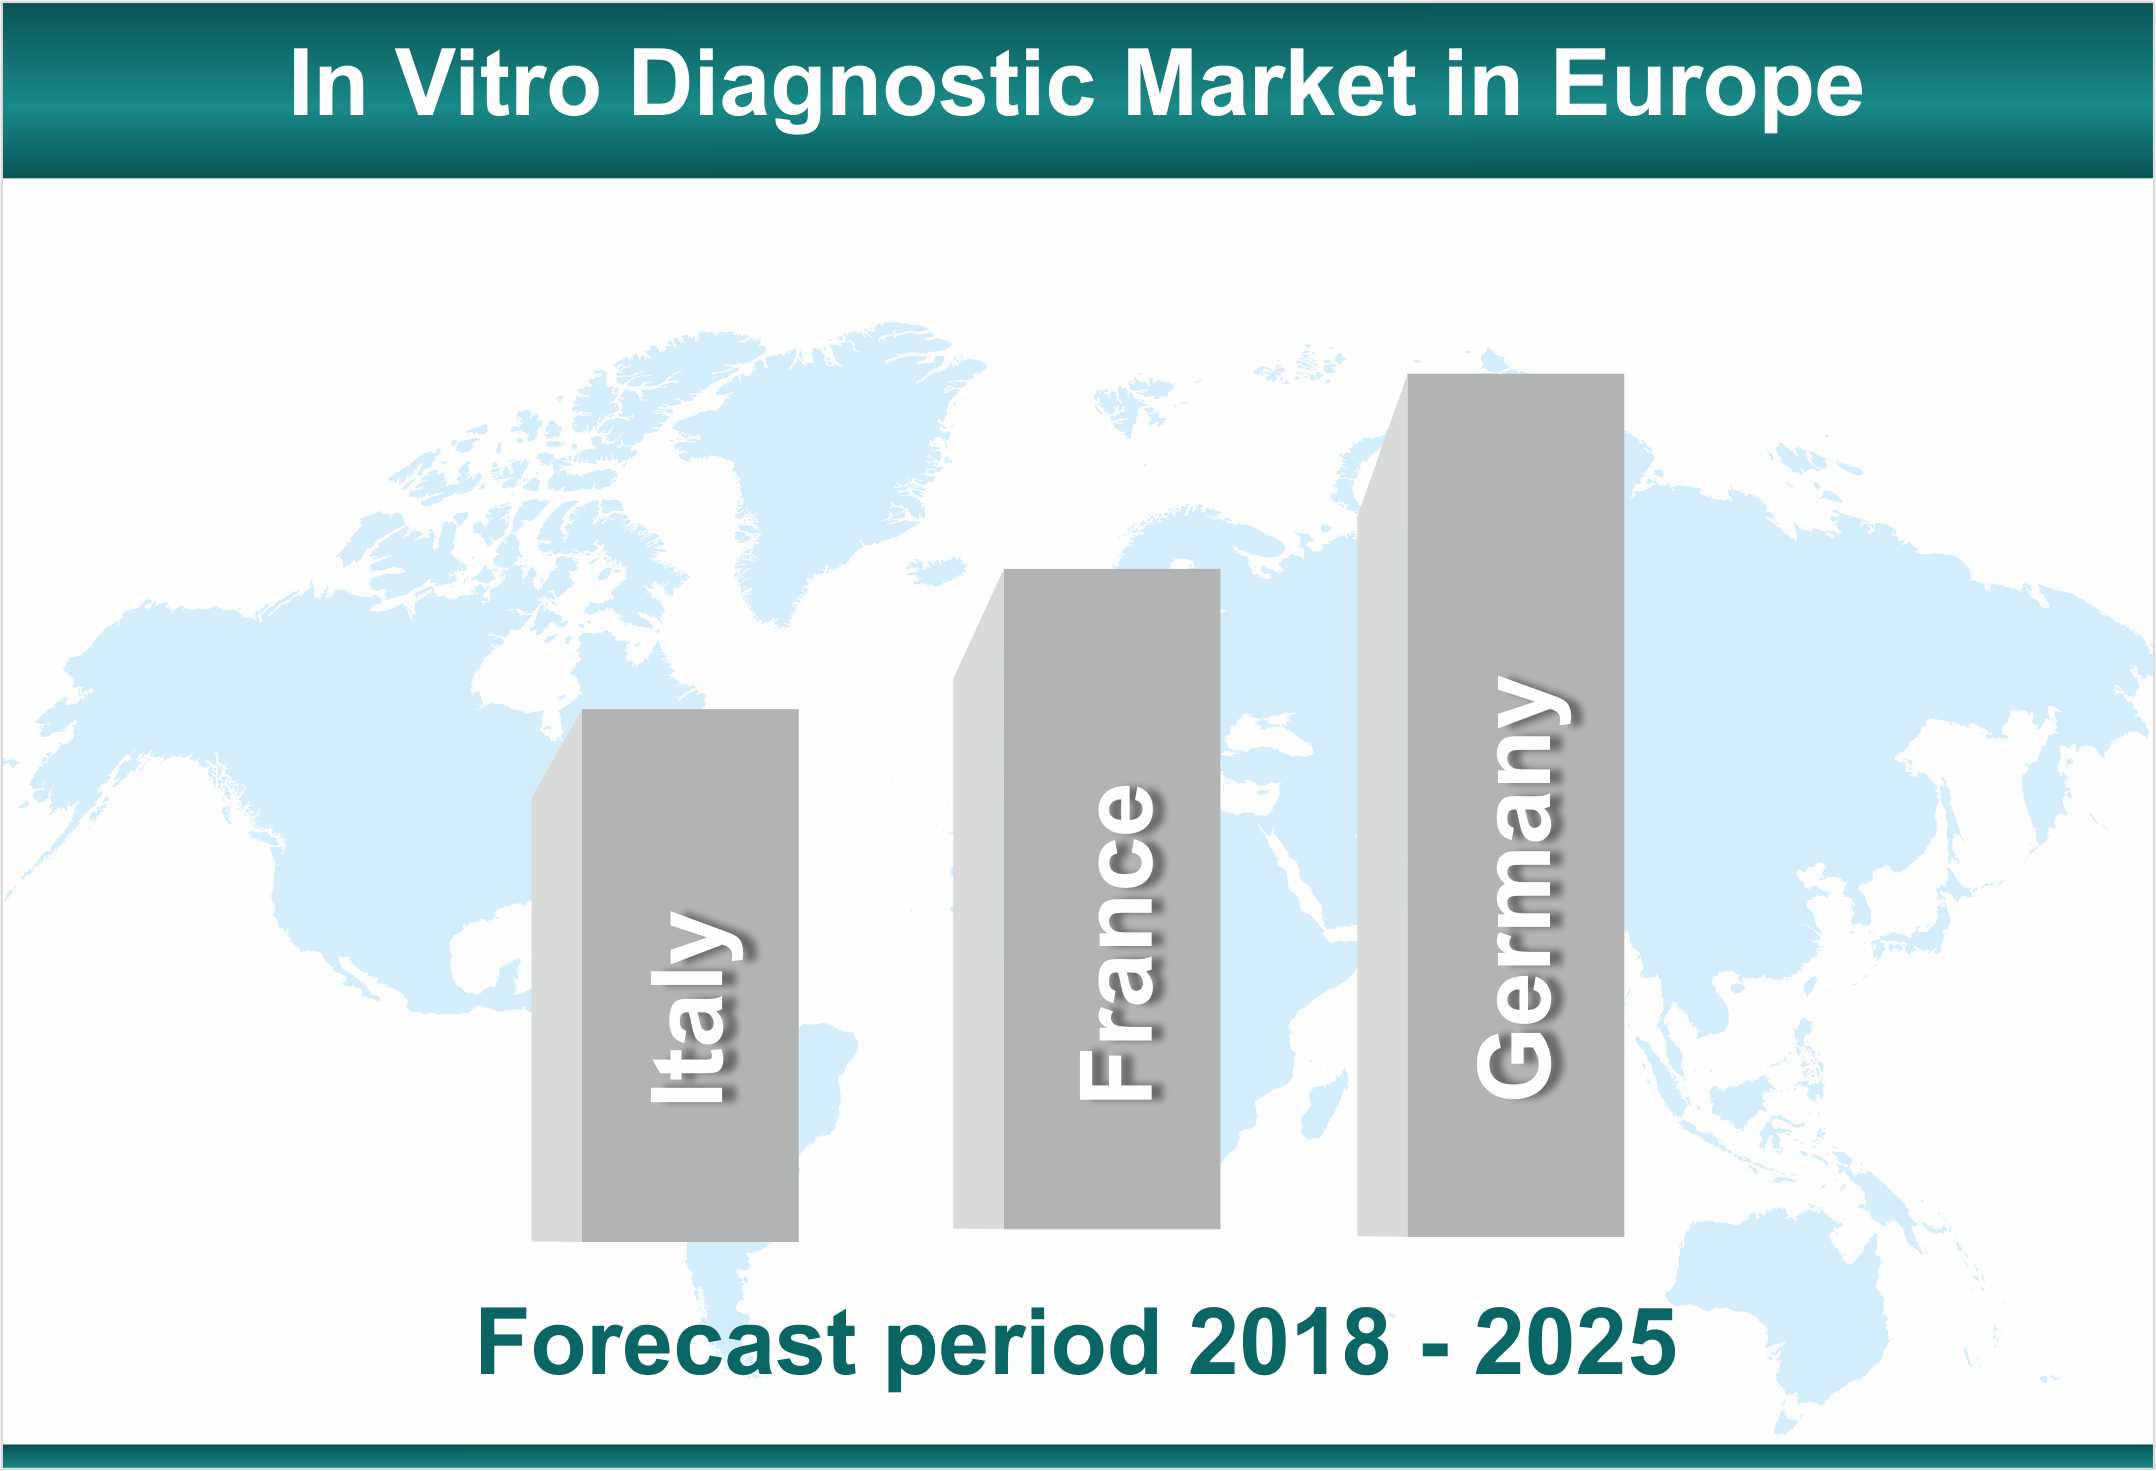 In Vitro Diagnostic Market in Europe Forecast Laying Guide Path for Investors